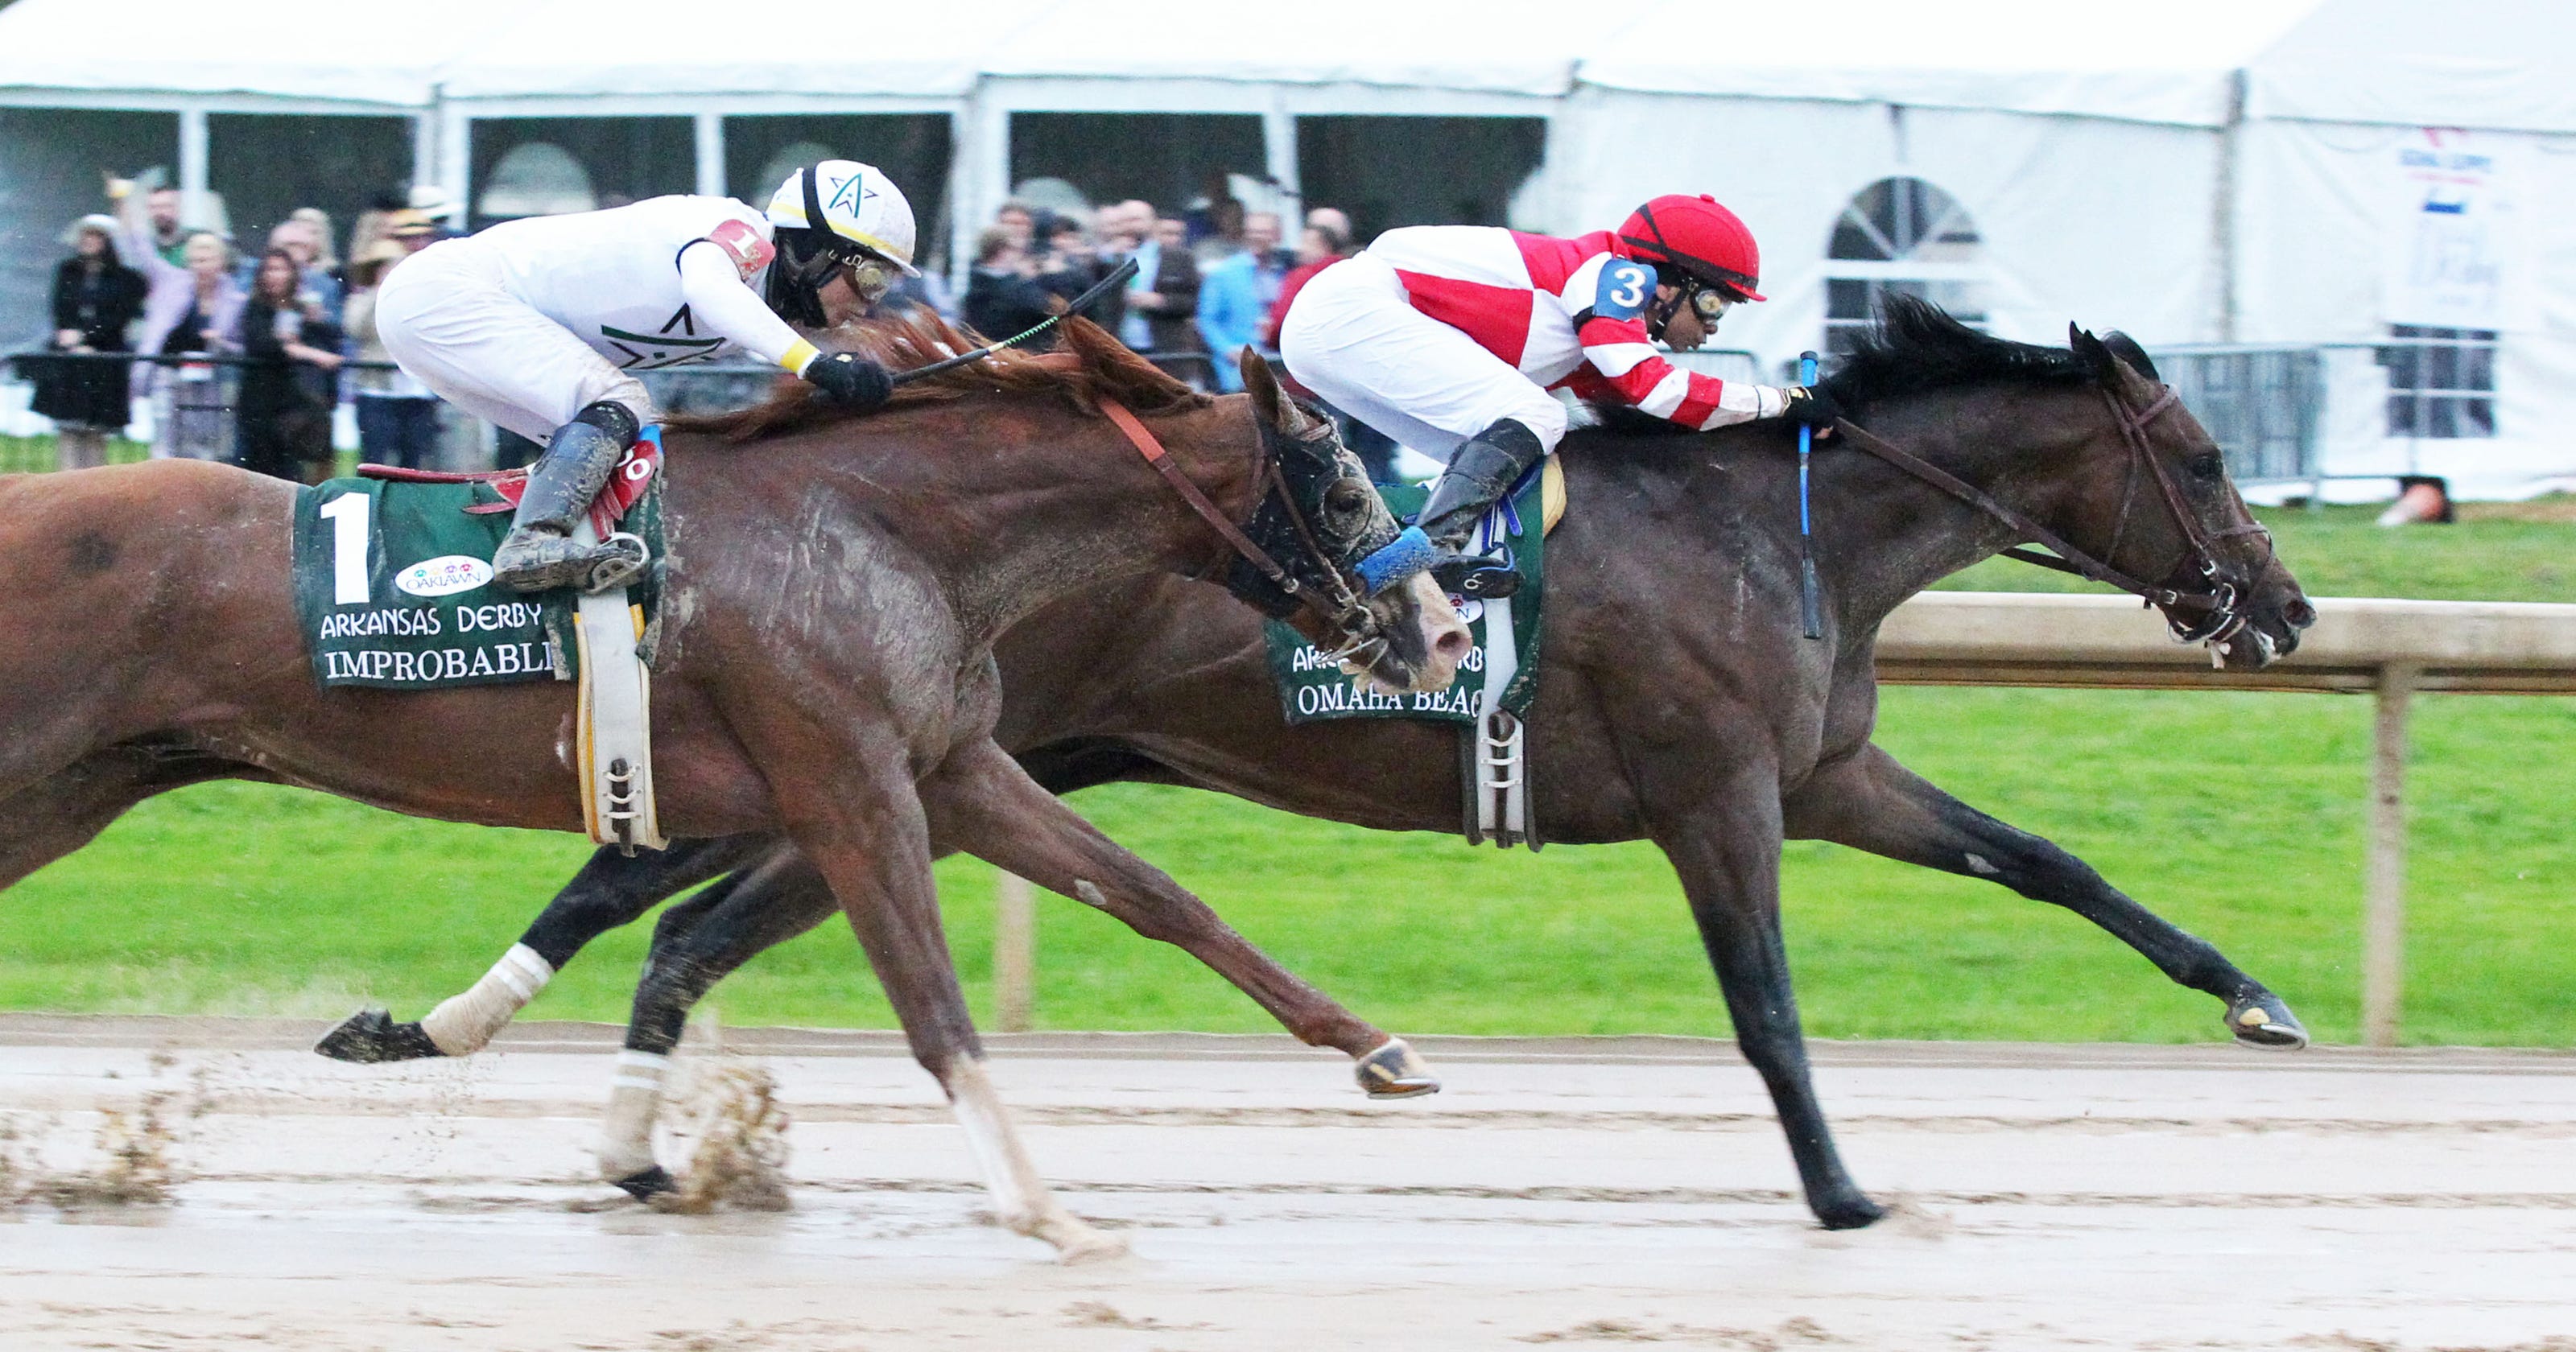 Who's running in the 2019 Kentucky Derby?